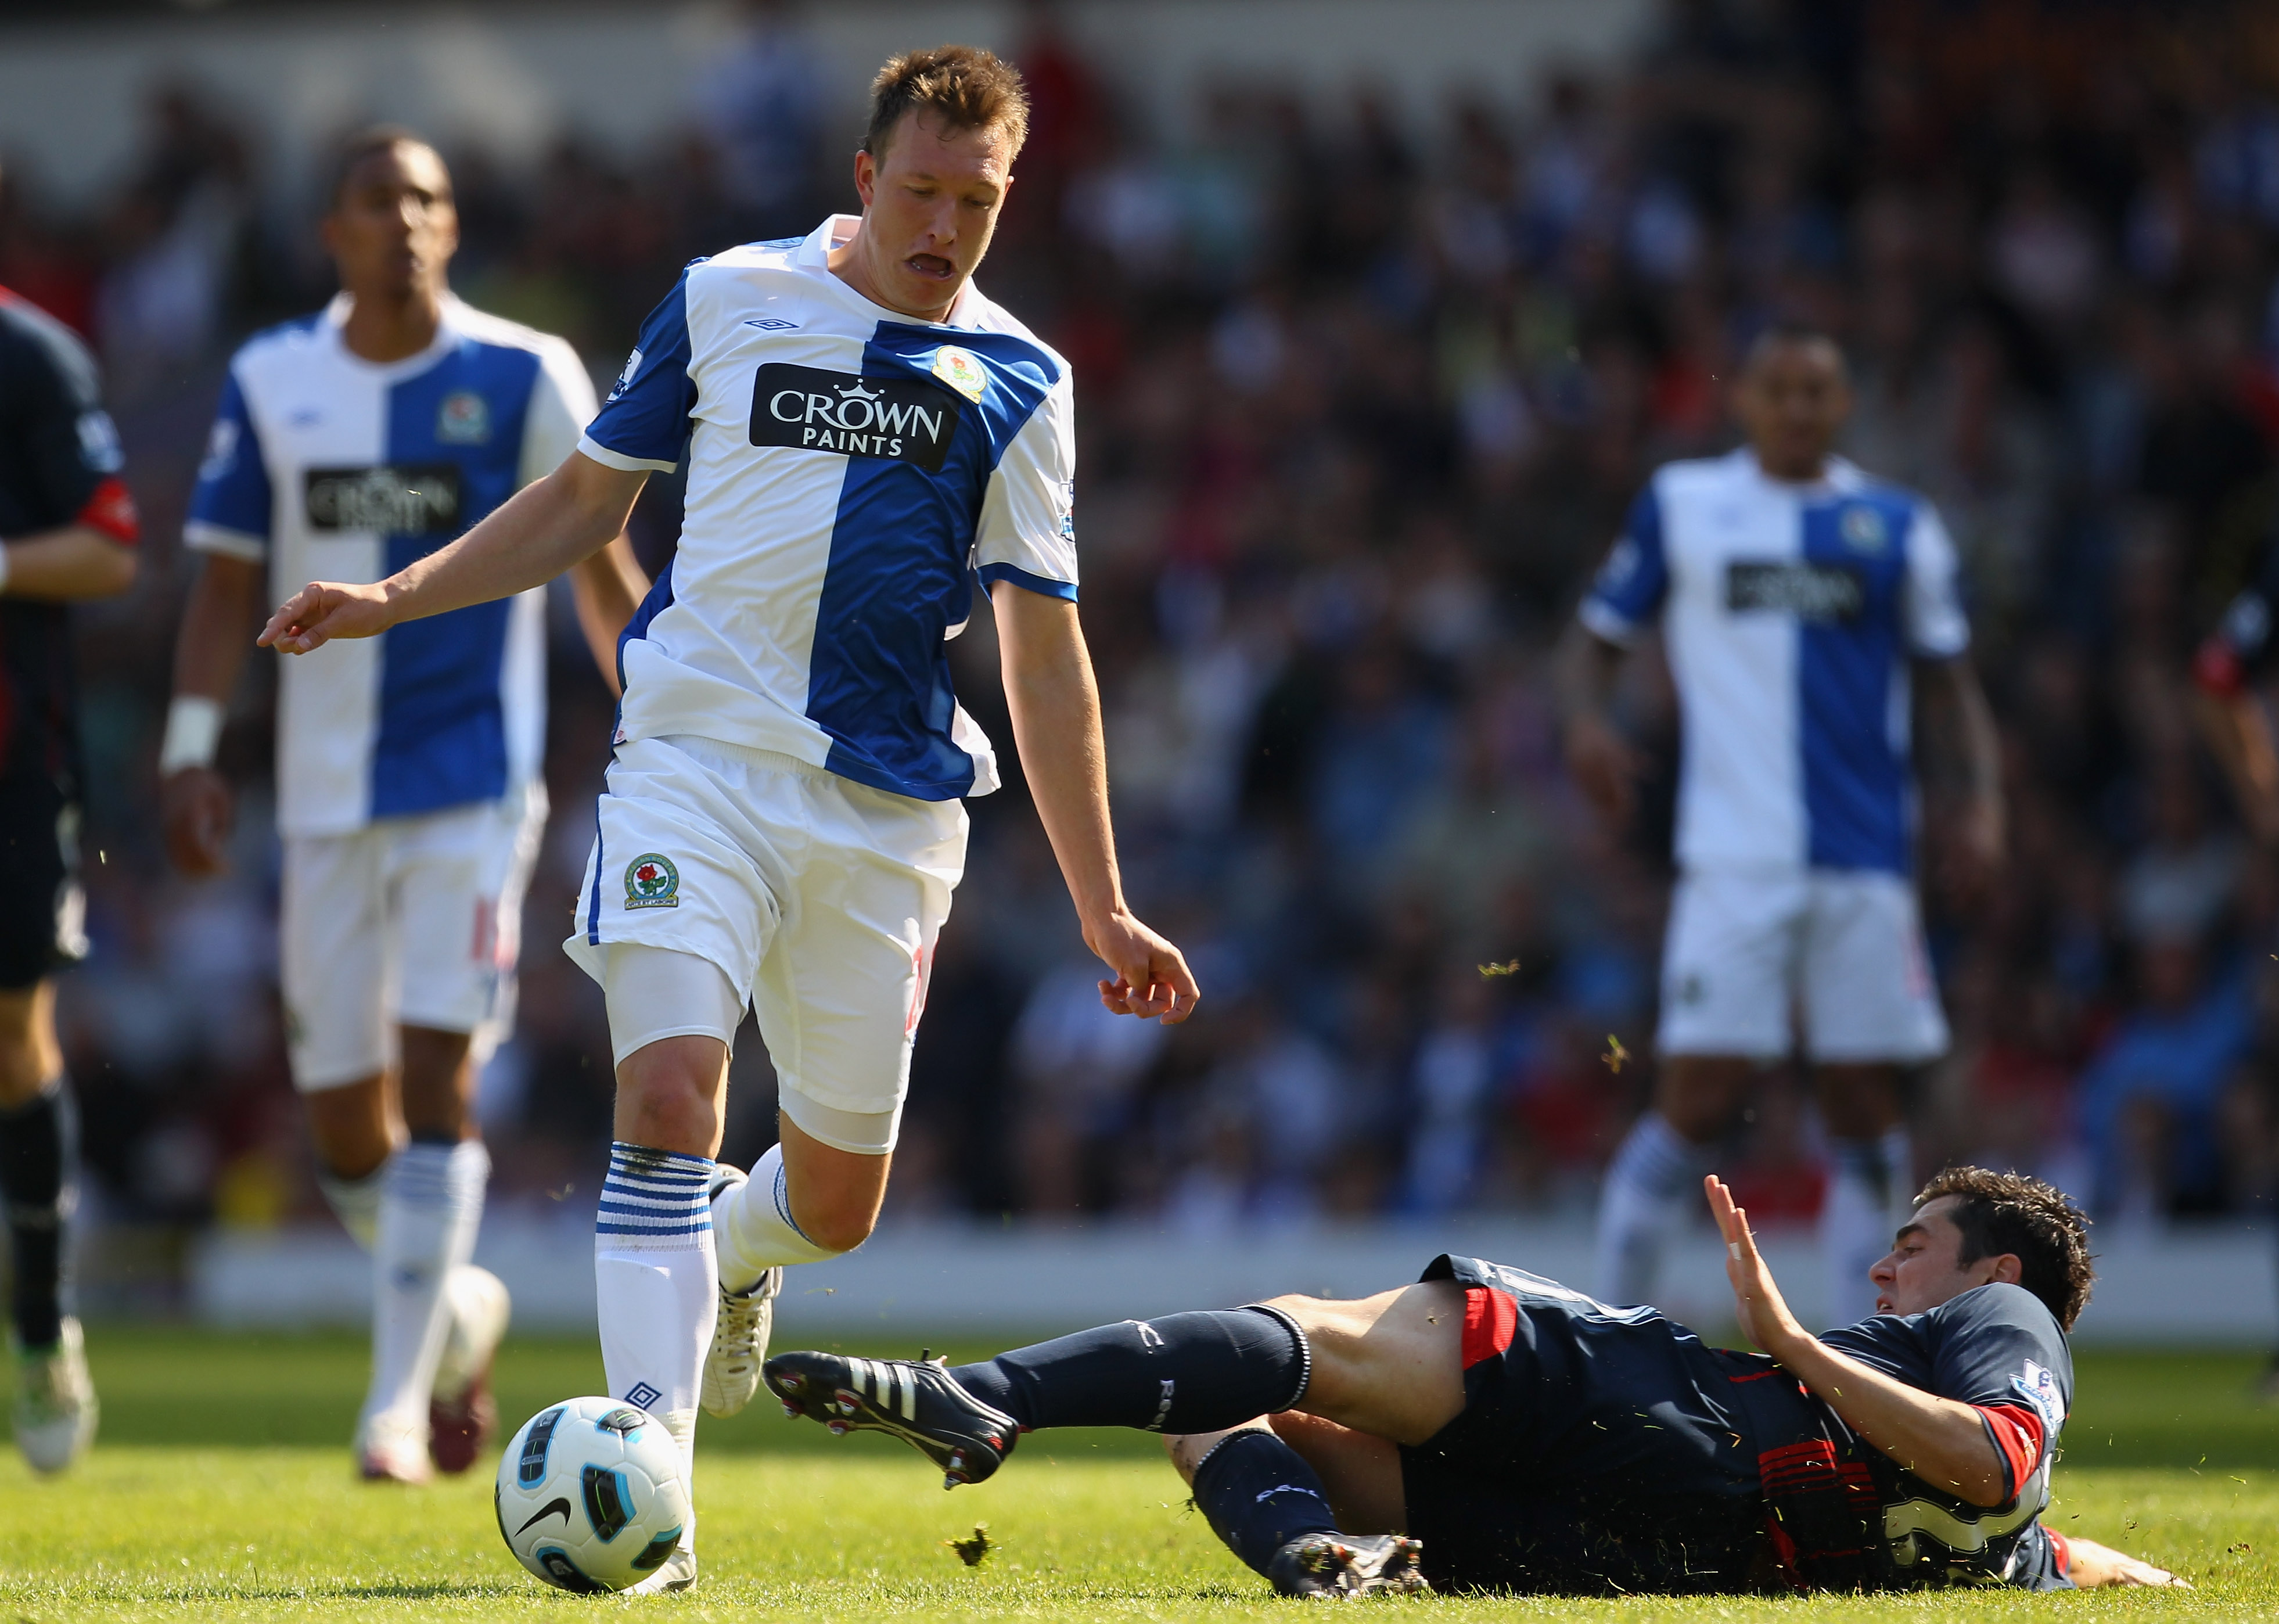 BLACKBURN, ENGLAND - APRIL 30:  Phil Jones of Blackburn Rovers is tackled by Tamir Cohen of Bolton Wanderers during the Barclays Premier League match between Blackburn Rovers and Bolton Wanderers at Ewood Park on April 30, 2011 in Blackburn, England.  (Ph